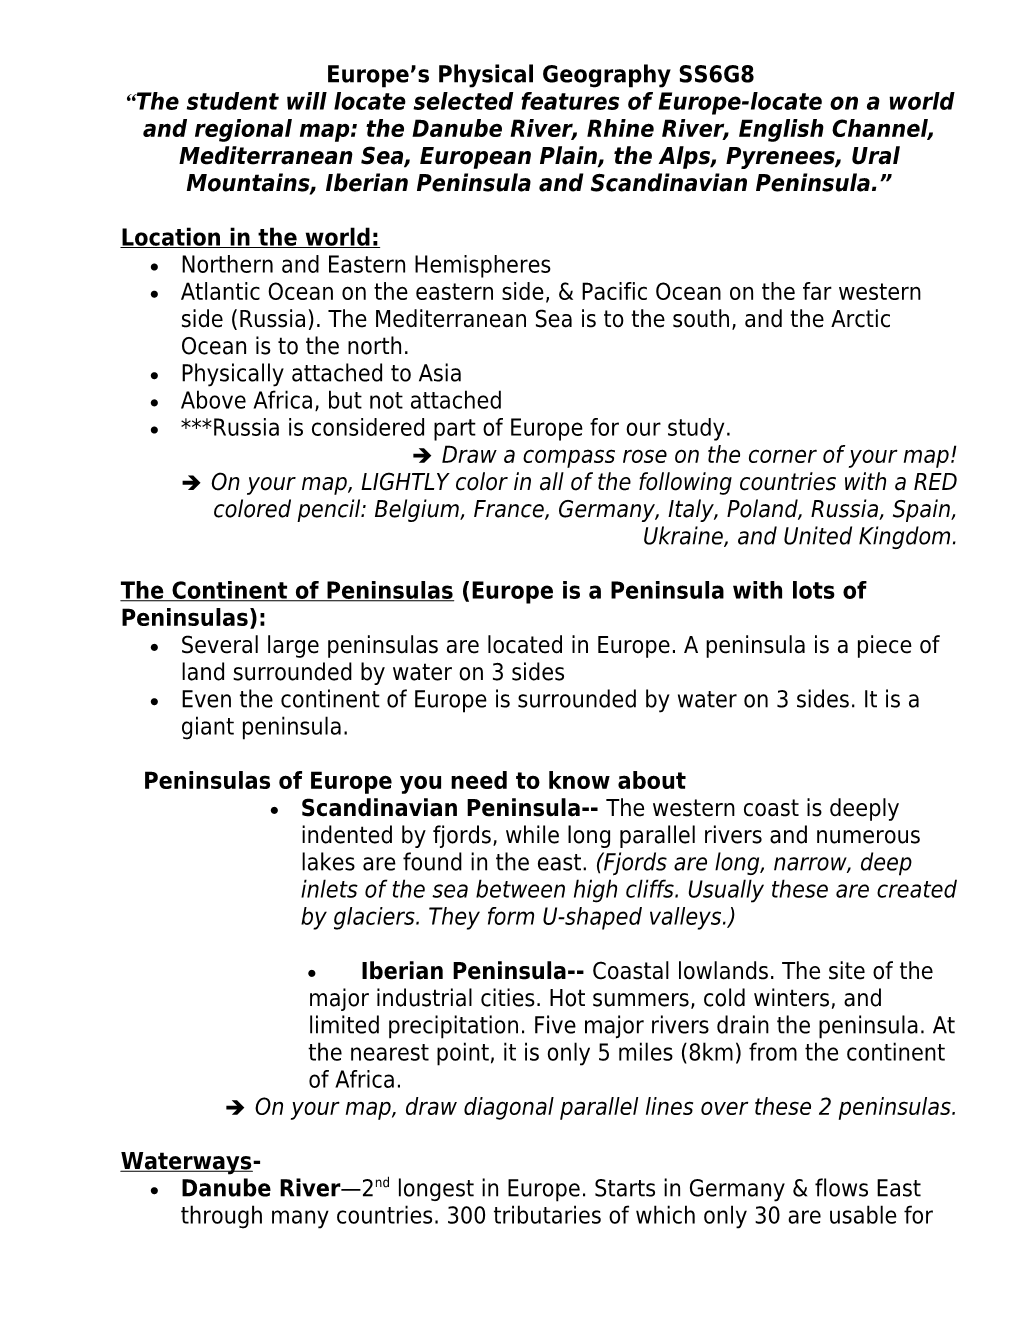 SS6G8- the Student Will Locate Selected Features of Europe-Locate on a World and Regional